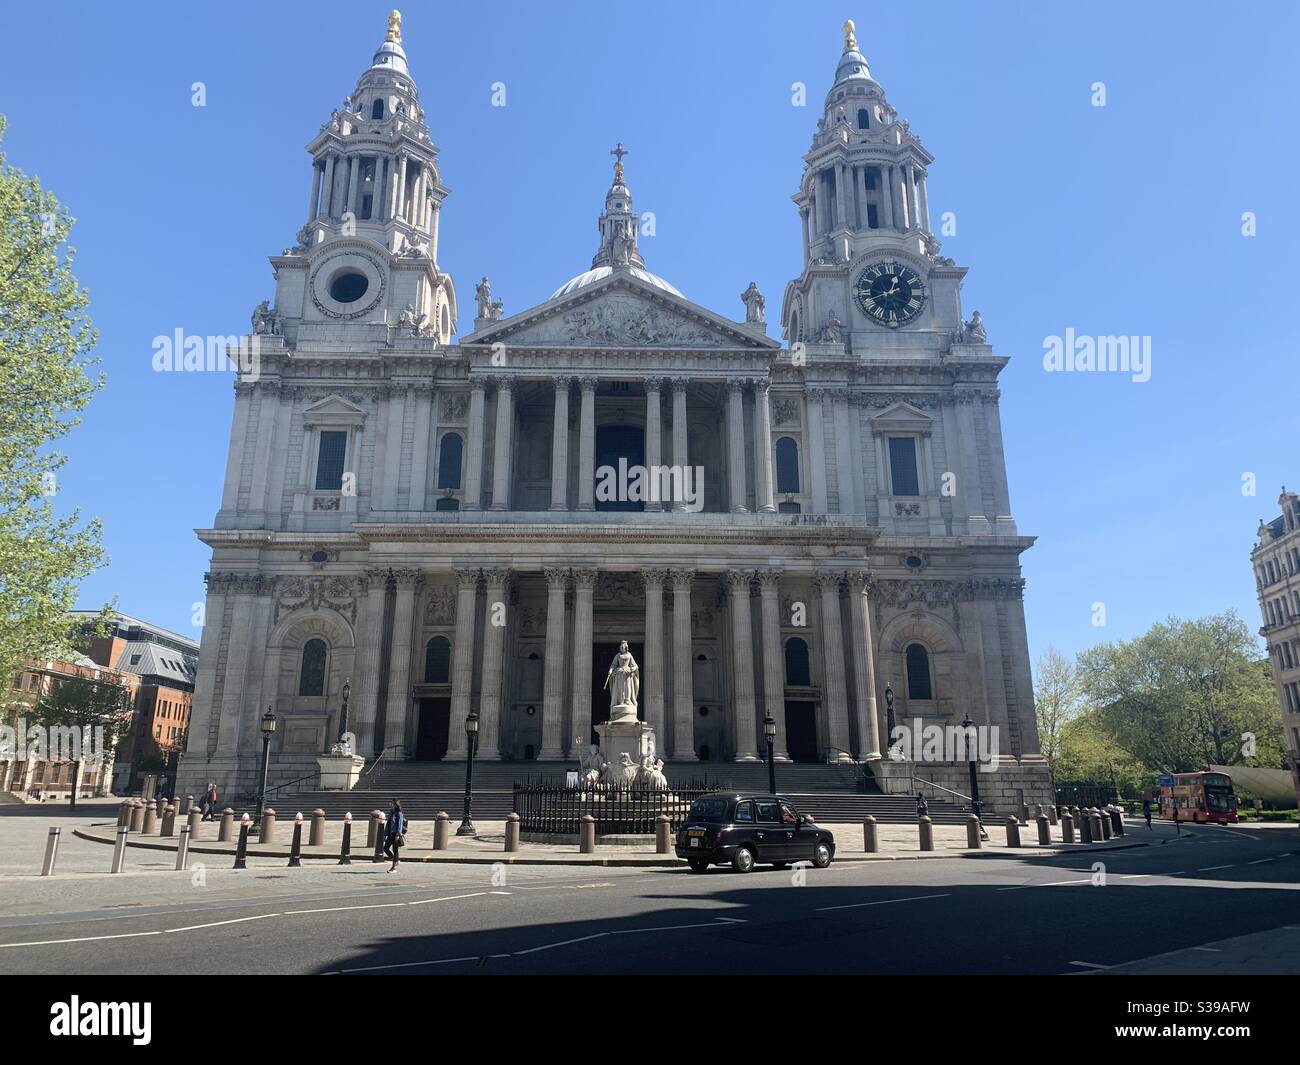 St Paul’s cathedral during lockdown. London lockdown. Stock Photo